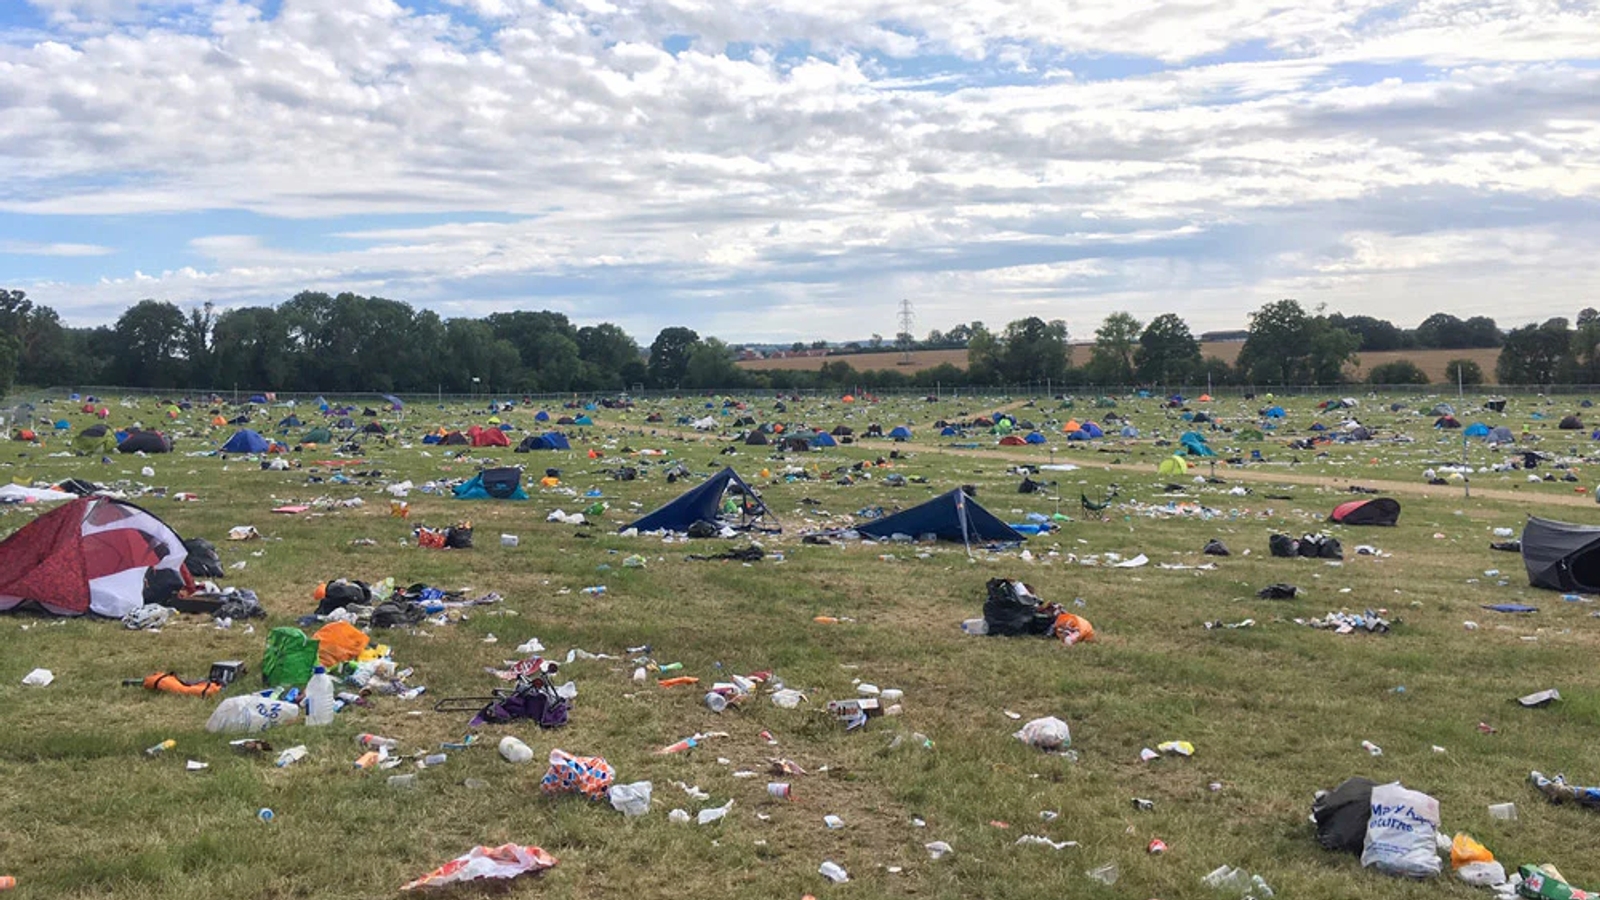 A field littered with tents and waste at the end of a festival